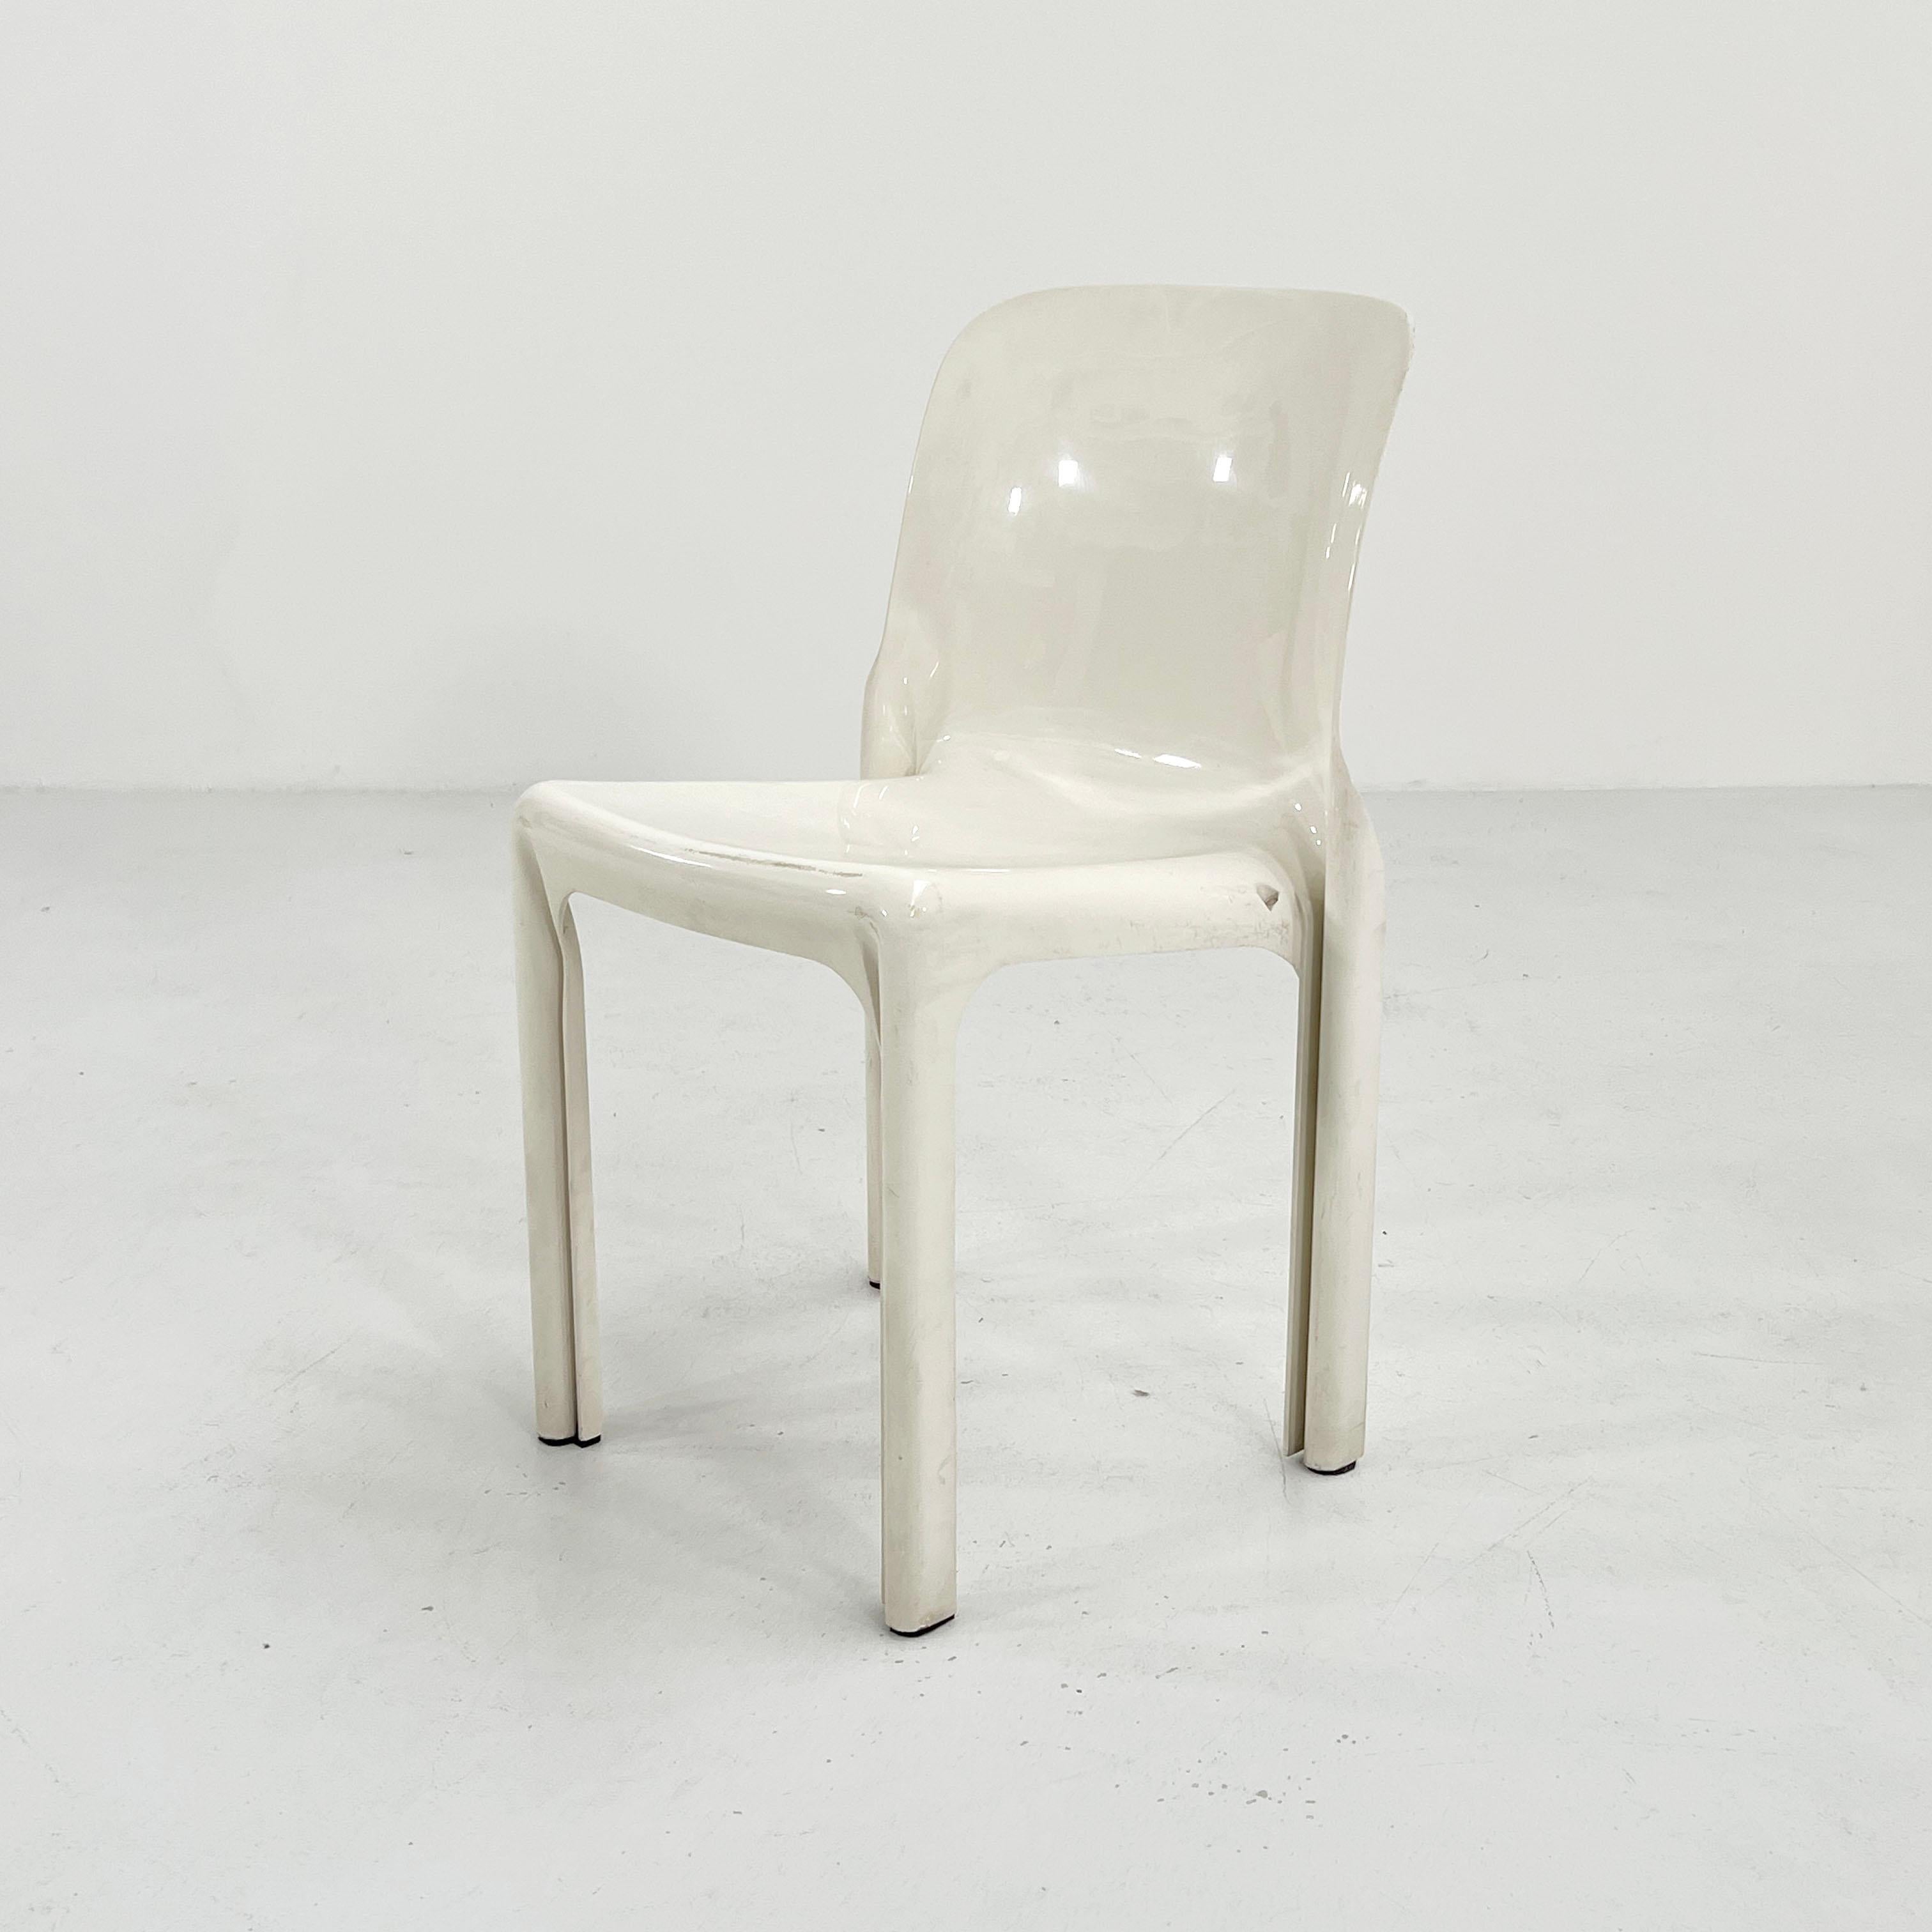 Designer - Vico Magistretti
Producer - Artemide
Model - Selene Chair
Design Period - Seventies
Measurements - Width 47 cm x Depth 50 cm x Height 76 cm x Seat Height 48 cm
Materials - Plastic
Color - White
Light wear consistent with age and